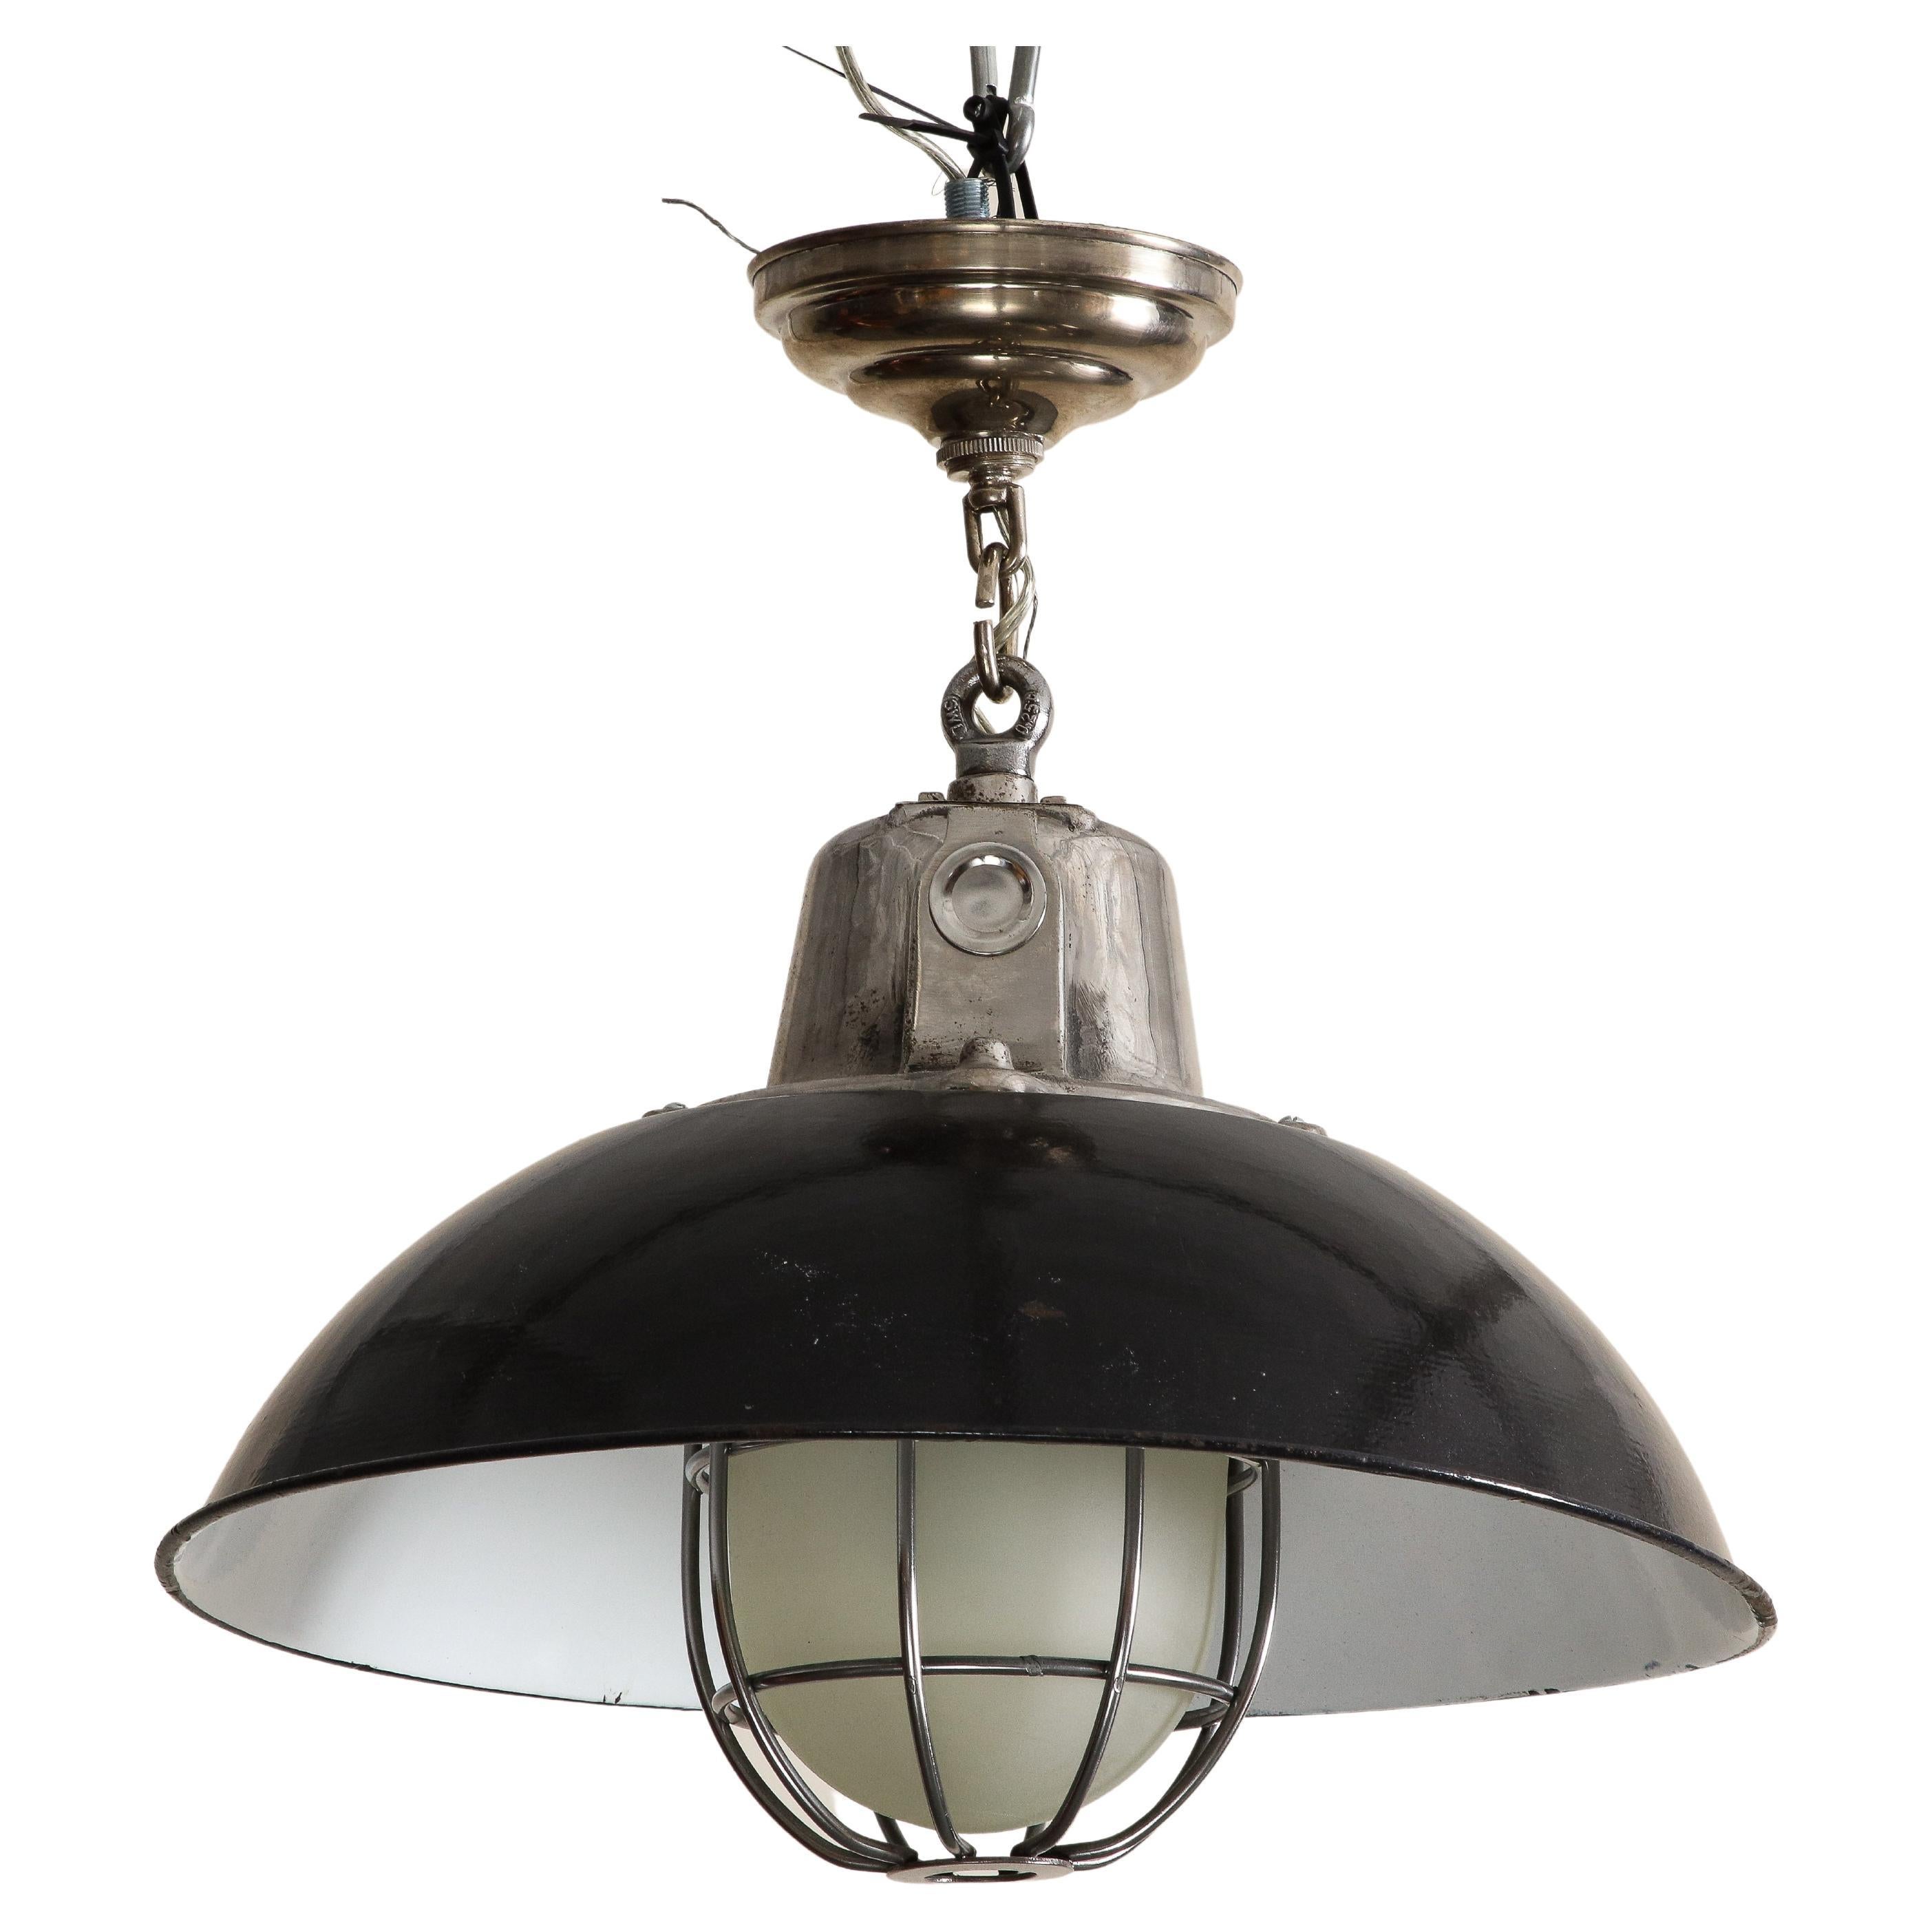 Pair of Midcentury Industrial Style Cage Pendant Lights with Black Enamel Shade